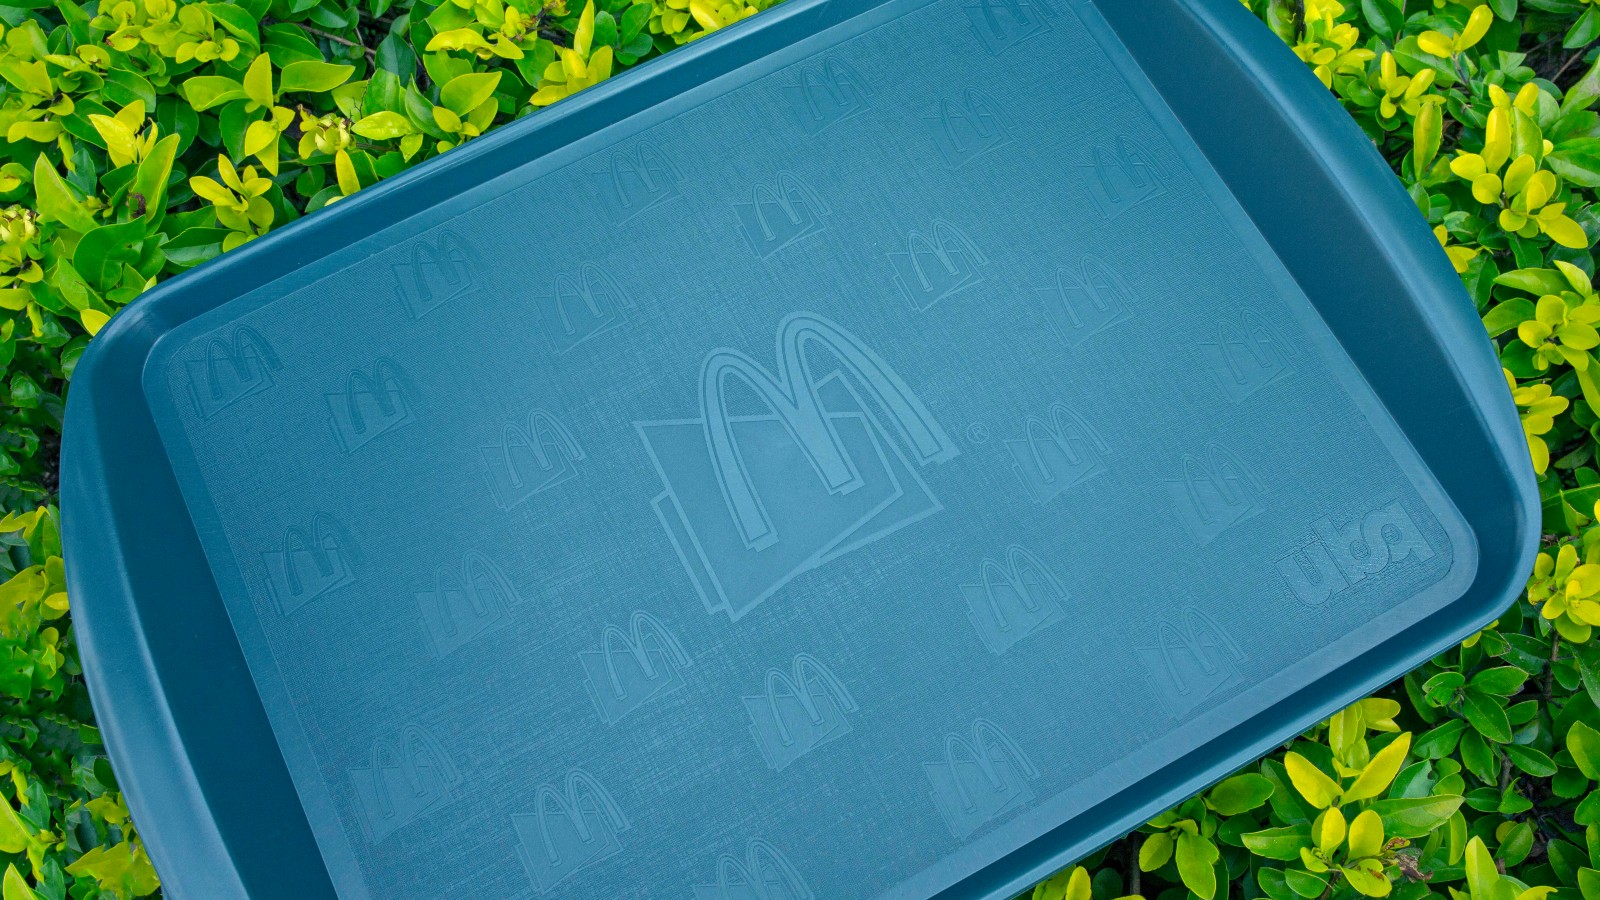 McDonald’s trays made of a plastic substitute derived from household trash. Photo courtesy of UBQ Materials